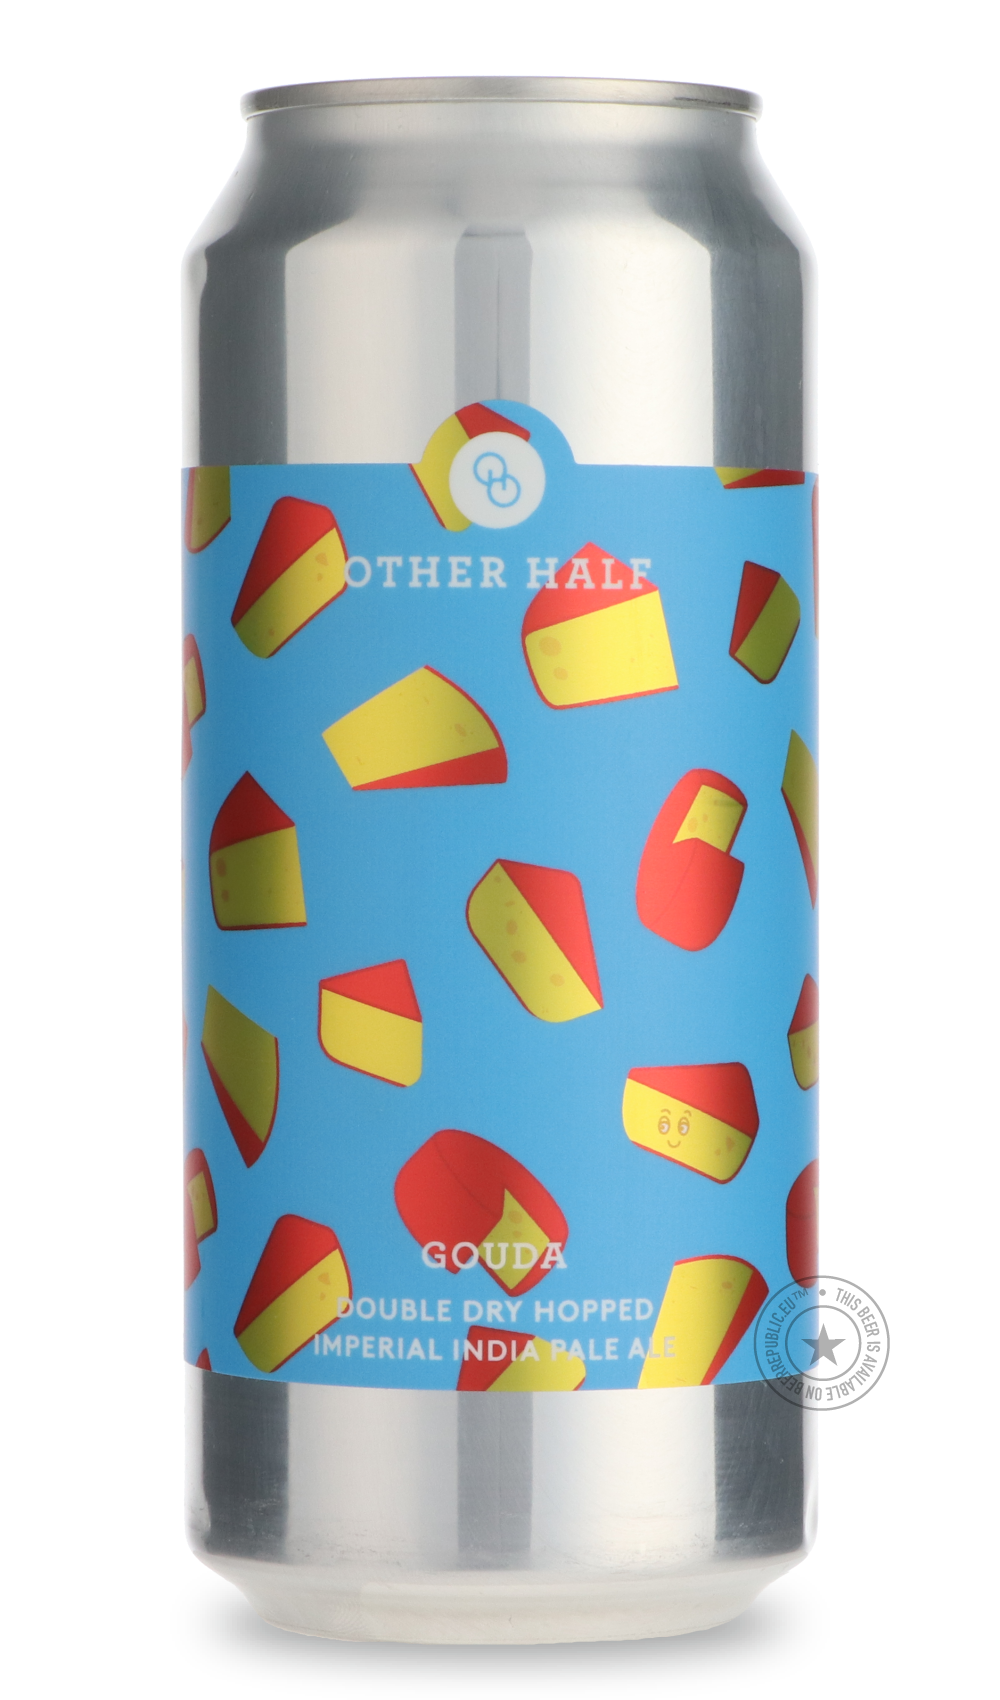 -Other Half- Gouda-IPA- Only @ Beer Republic - The best online beer store for American & Canadian craft beer - Buy beer online from the USA and Canada - Bier online kopen - Amerikaans bier kopen - Craft beer store - Craft beer kopen - Amerikanisch bier kaufen - Bier online kaufen - Acheter biere online - IPA - Stout - Porter - New England IPA - Hazy IPA - Imperial Stout - Barrel Aged - Barrel Aged Imperial Stout - Brown - Dark beer - Blond - Blonde - Pilsner - Lager - Wheat - Weizen - Amber - Barley Wine - 